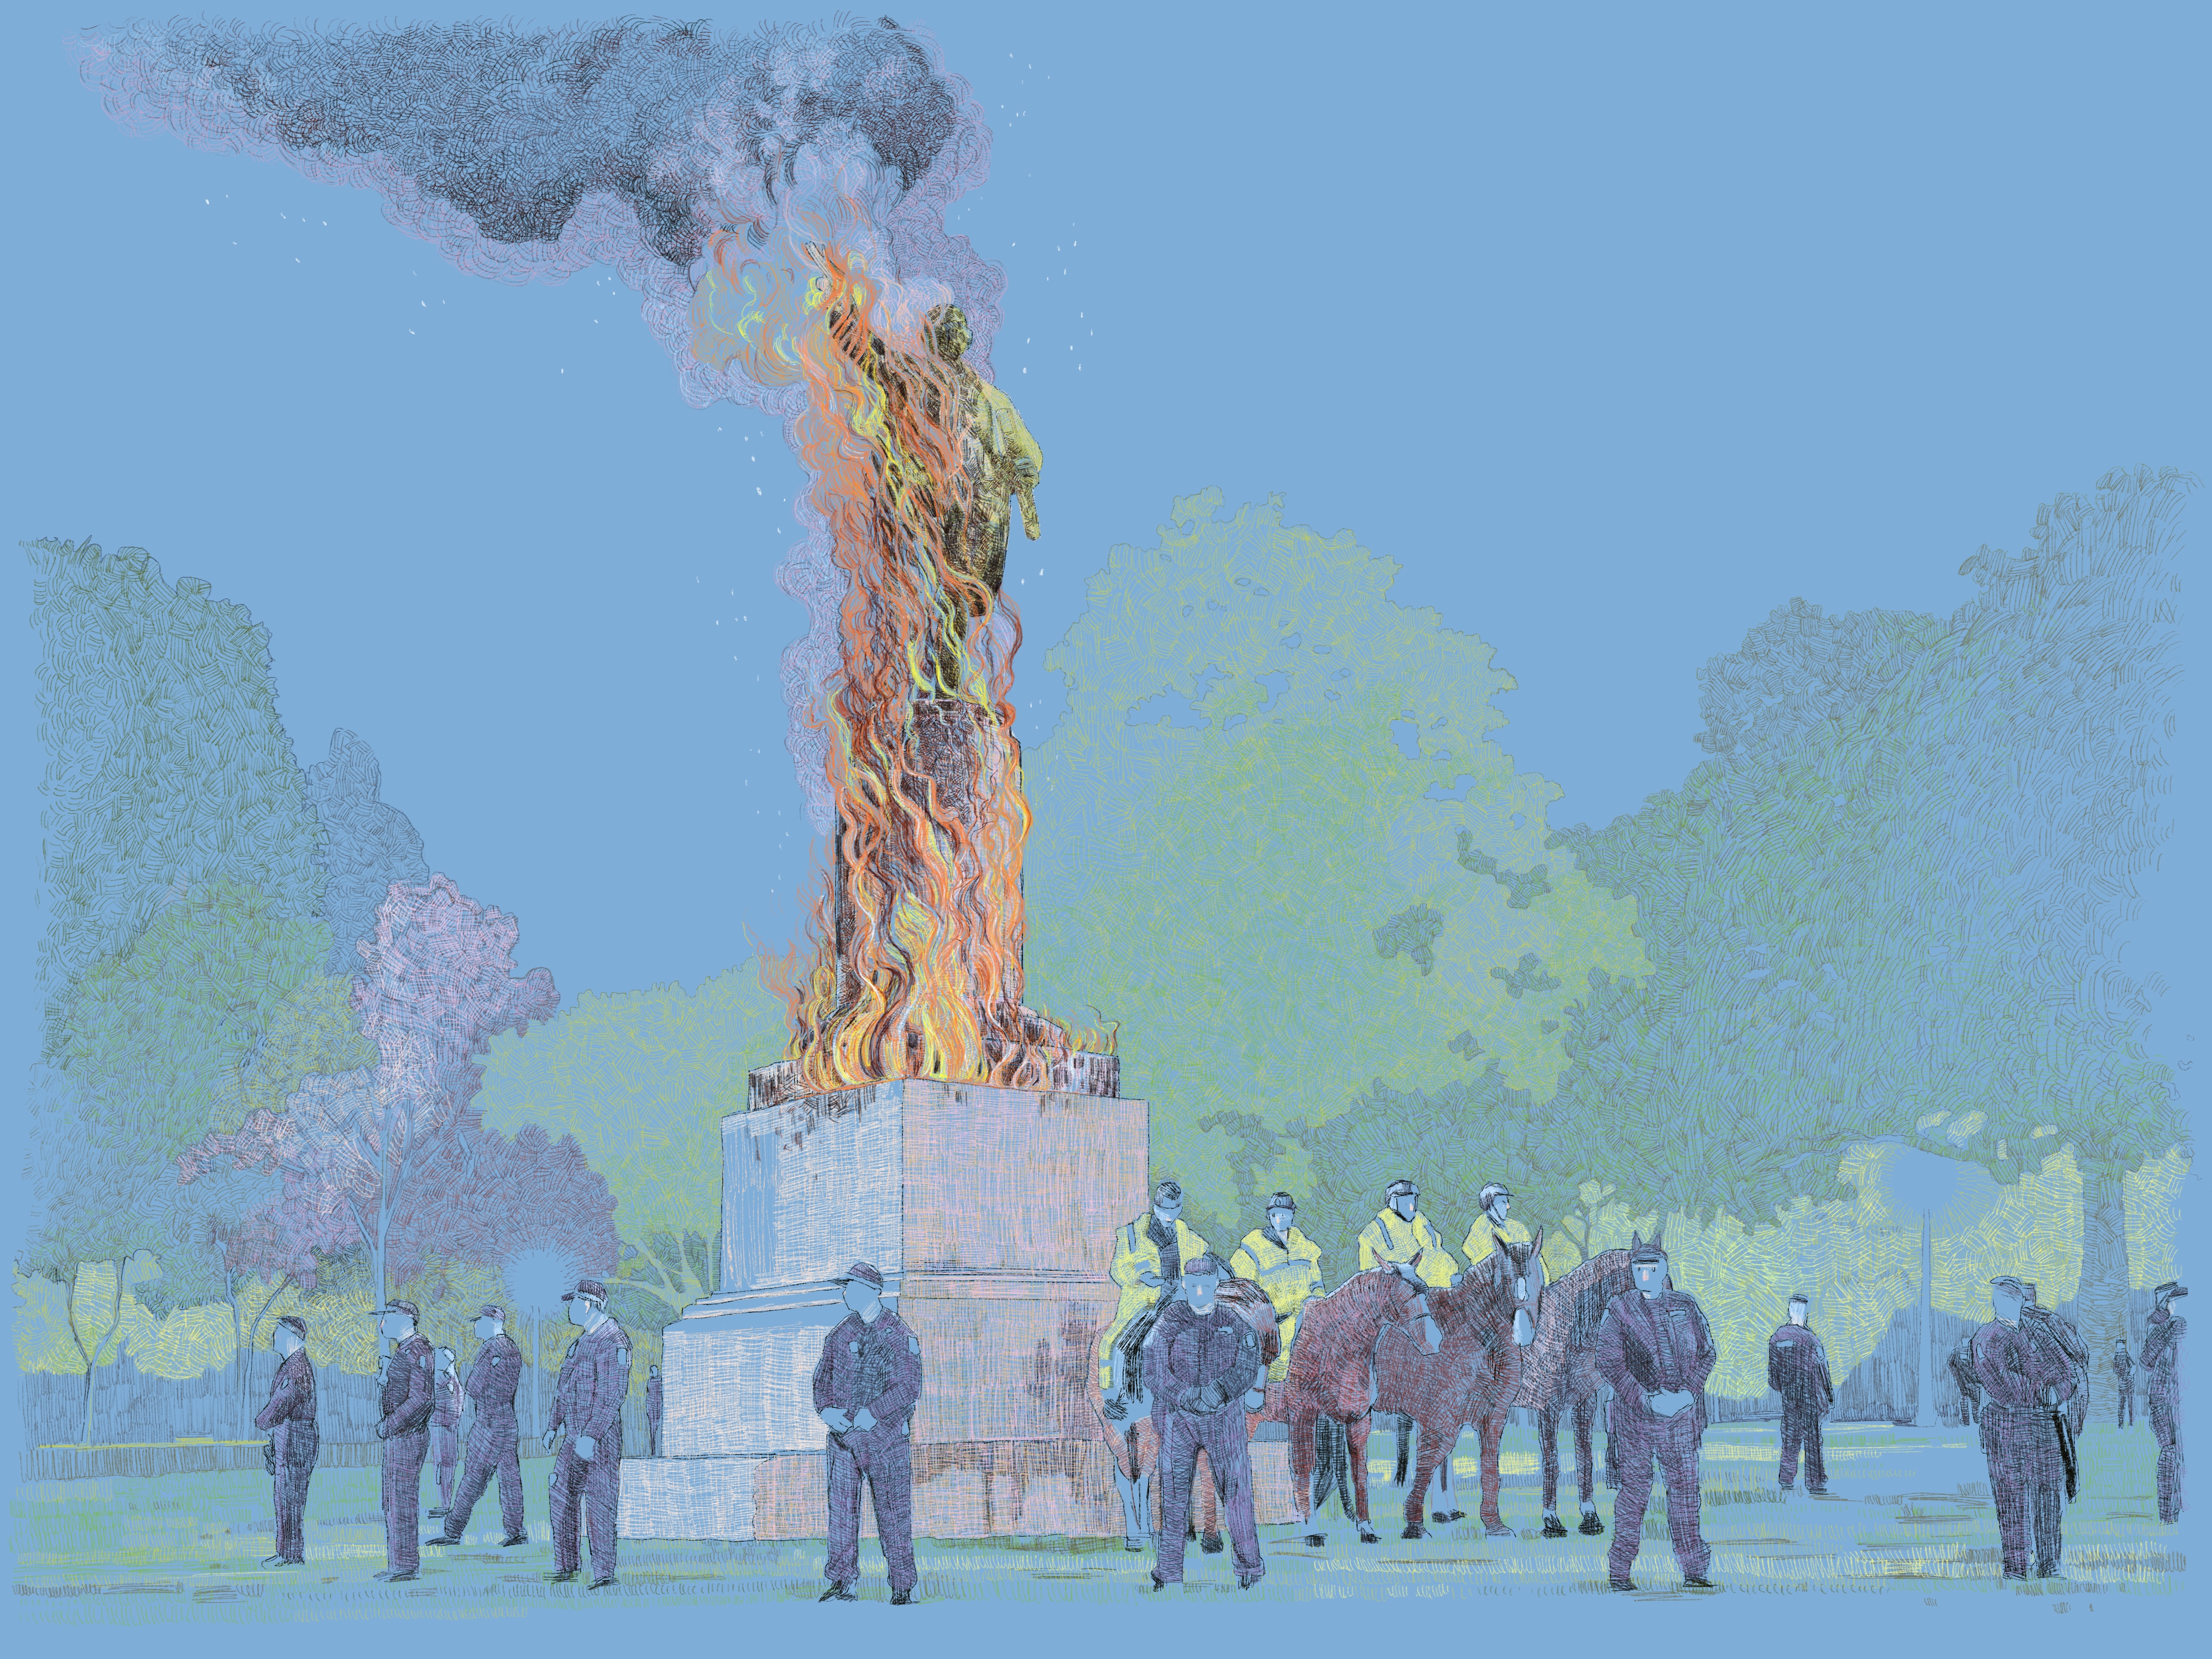 A sketch of the Captain Cook statue in Sydney's Hyde Park surrounded by standing and mounted police, based on scenes from the 2020 Black Lives Matter rallies. The statue of Cook is burning, with black smoke rising from the flames.